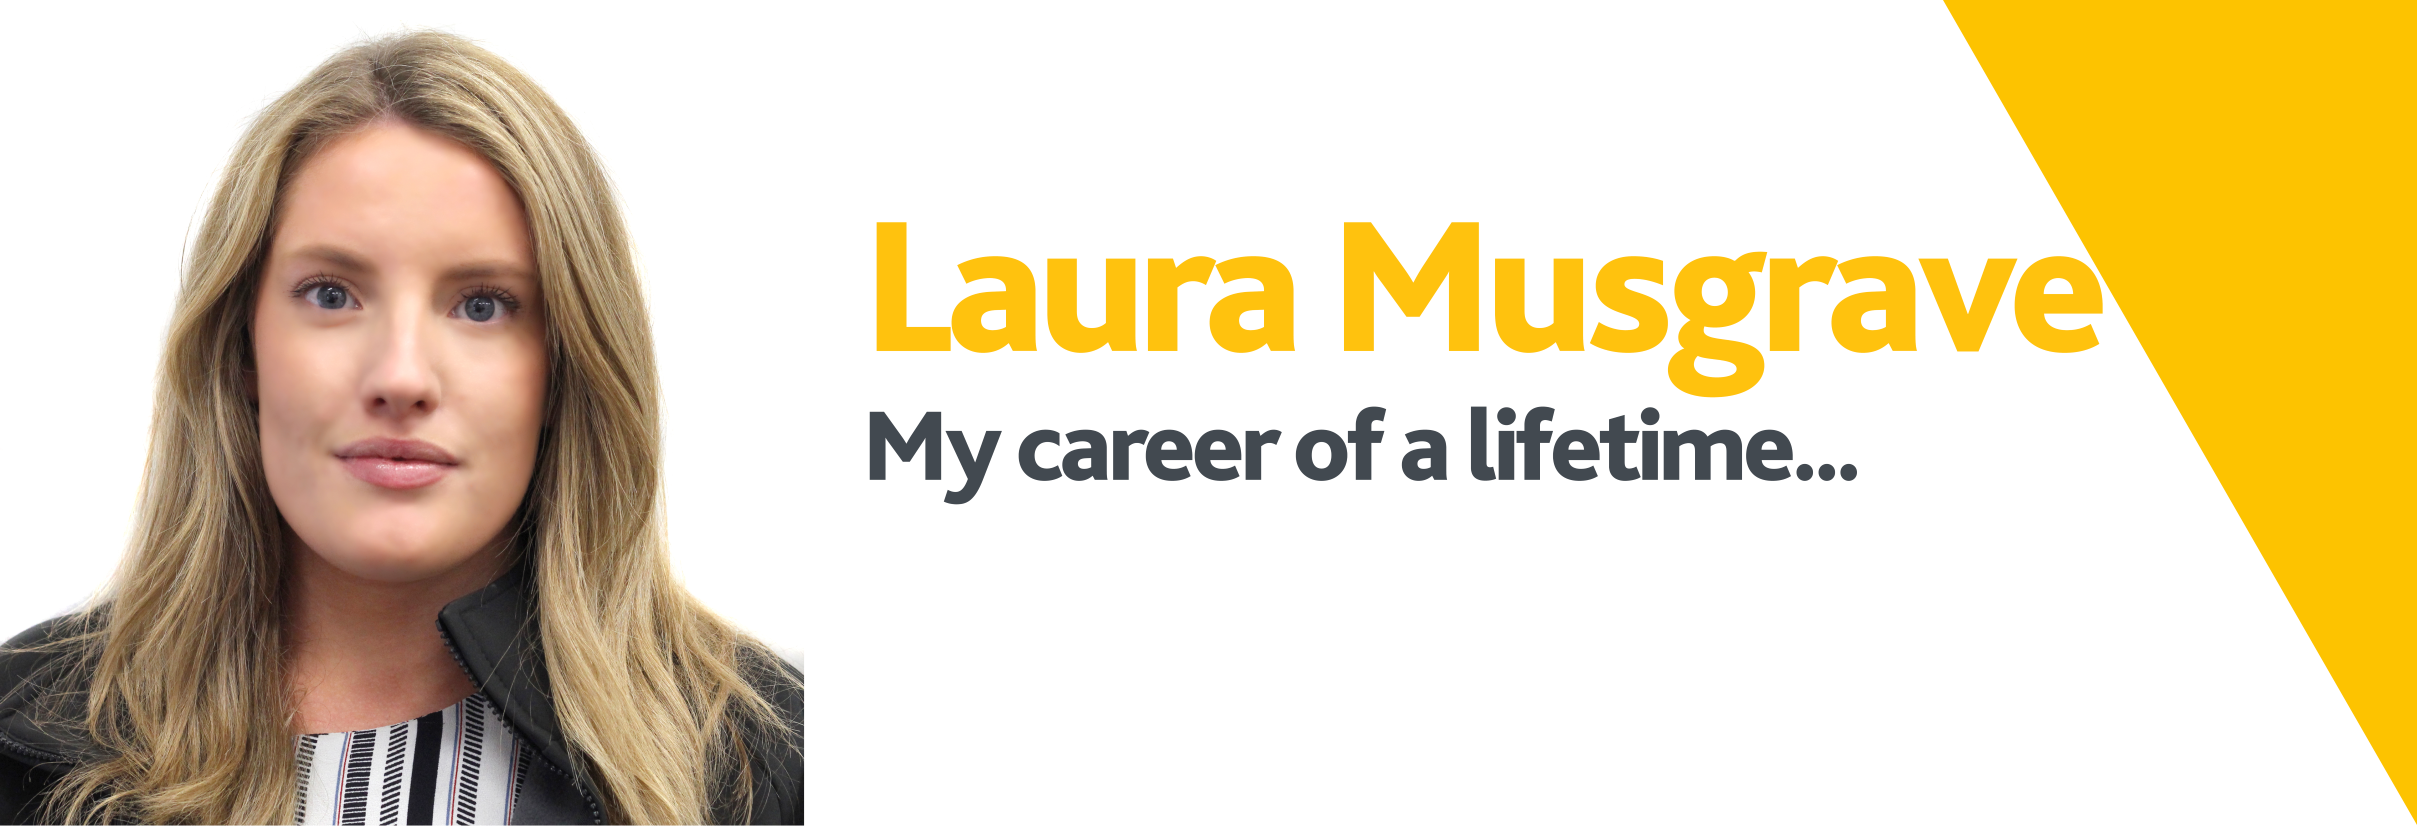 Career of a lifetime - Laura Musgrave.png